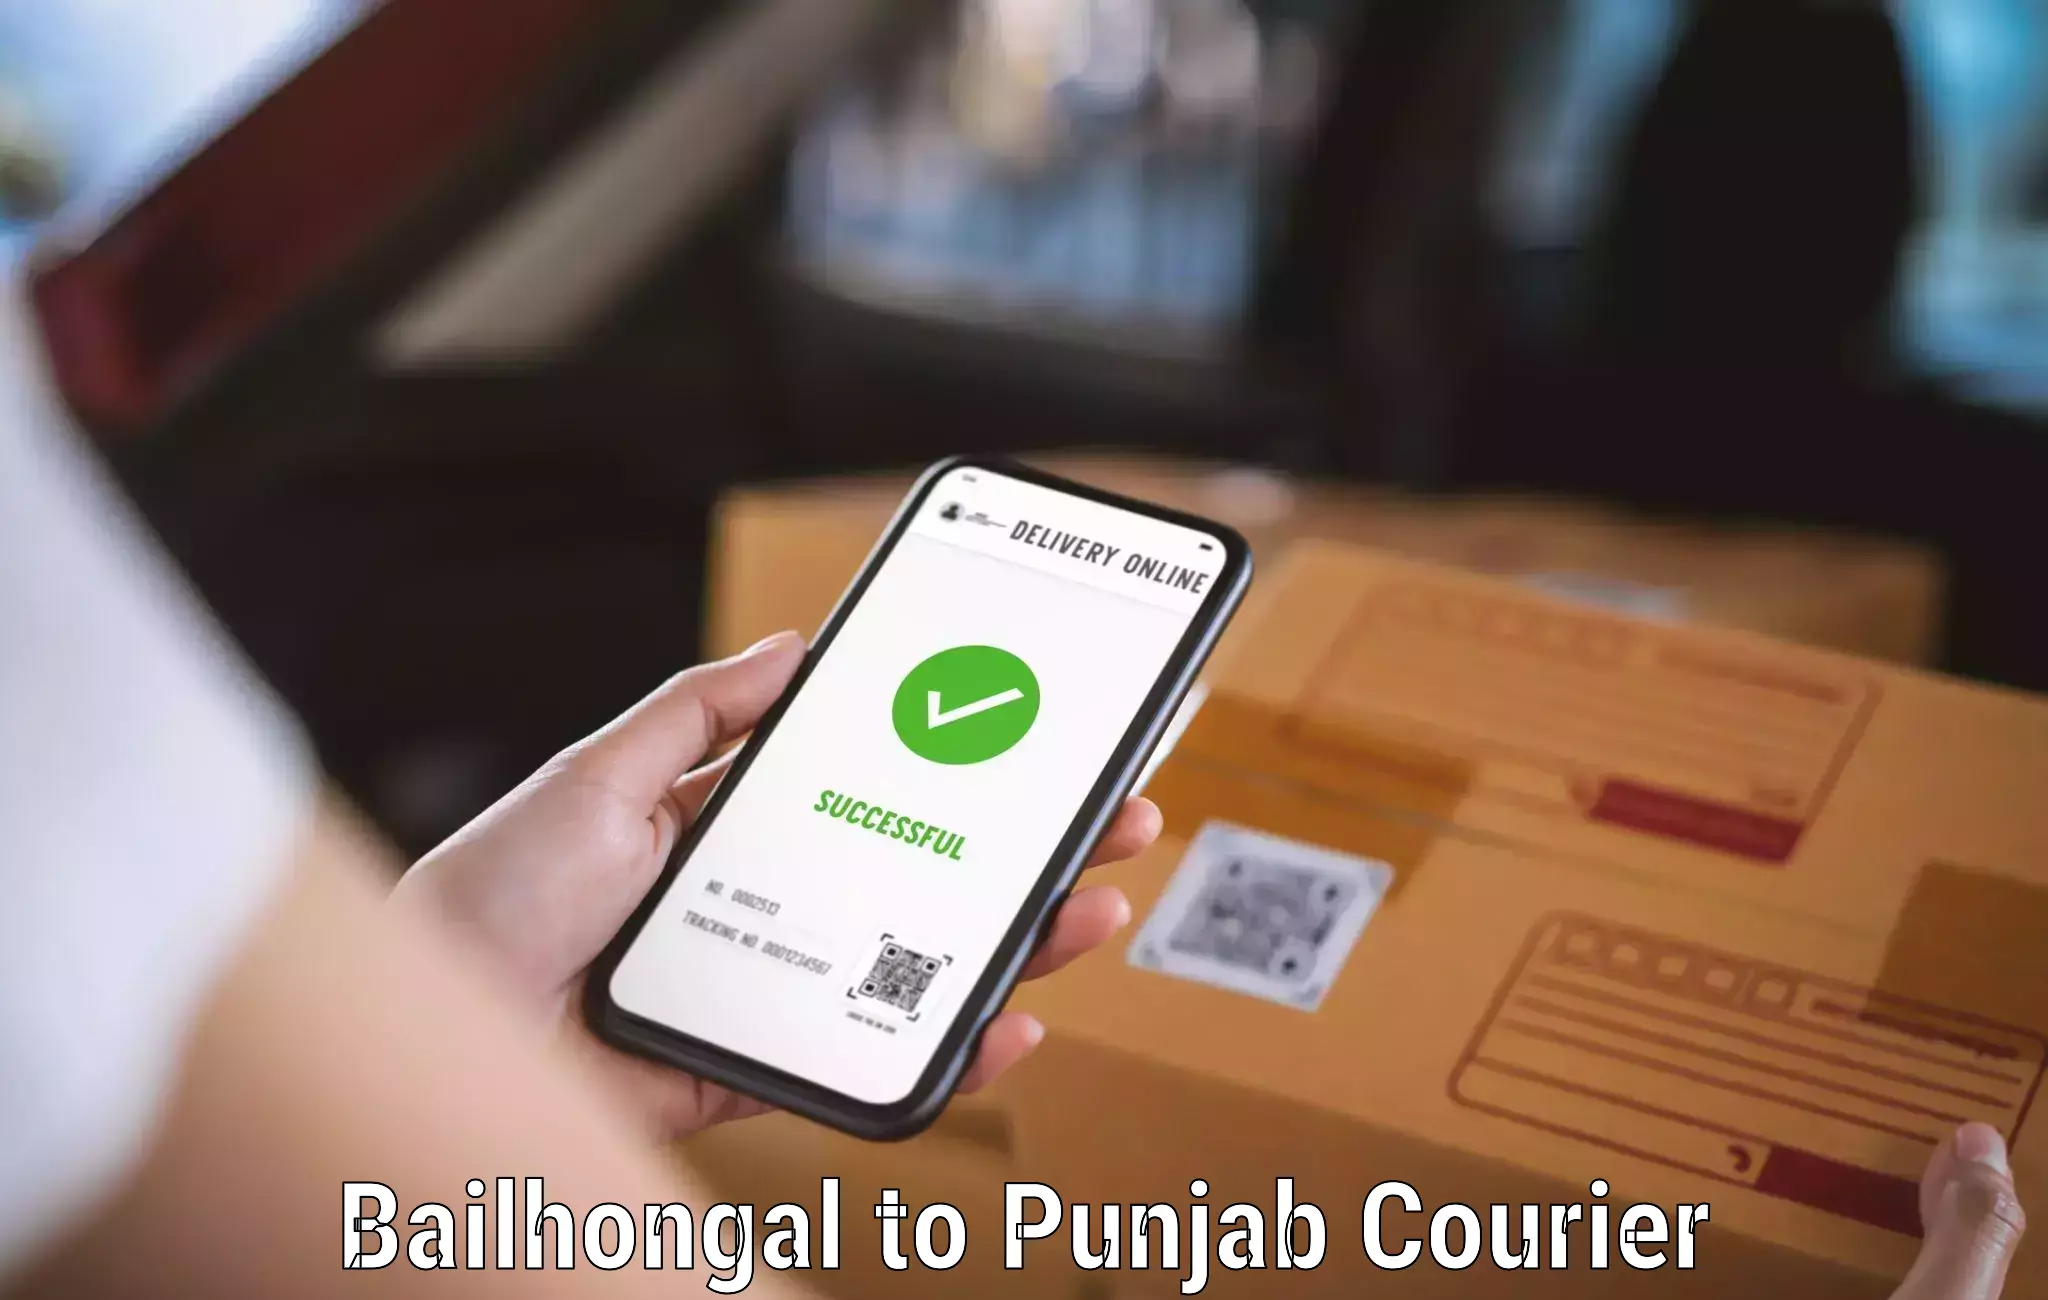 High-priority parcel service Bailhongal to Ludhiana